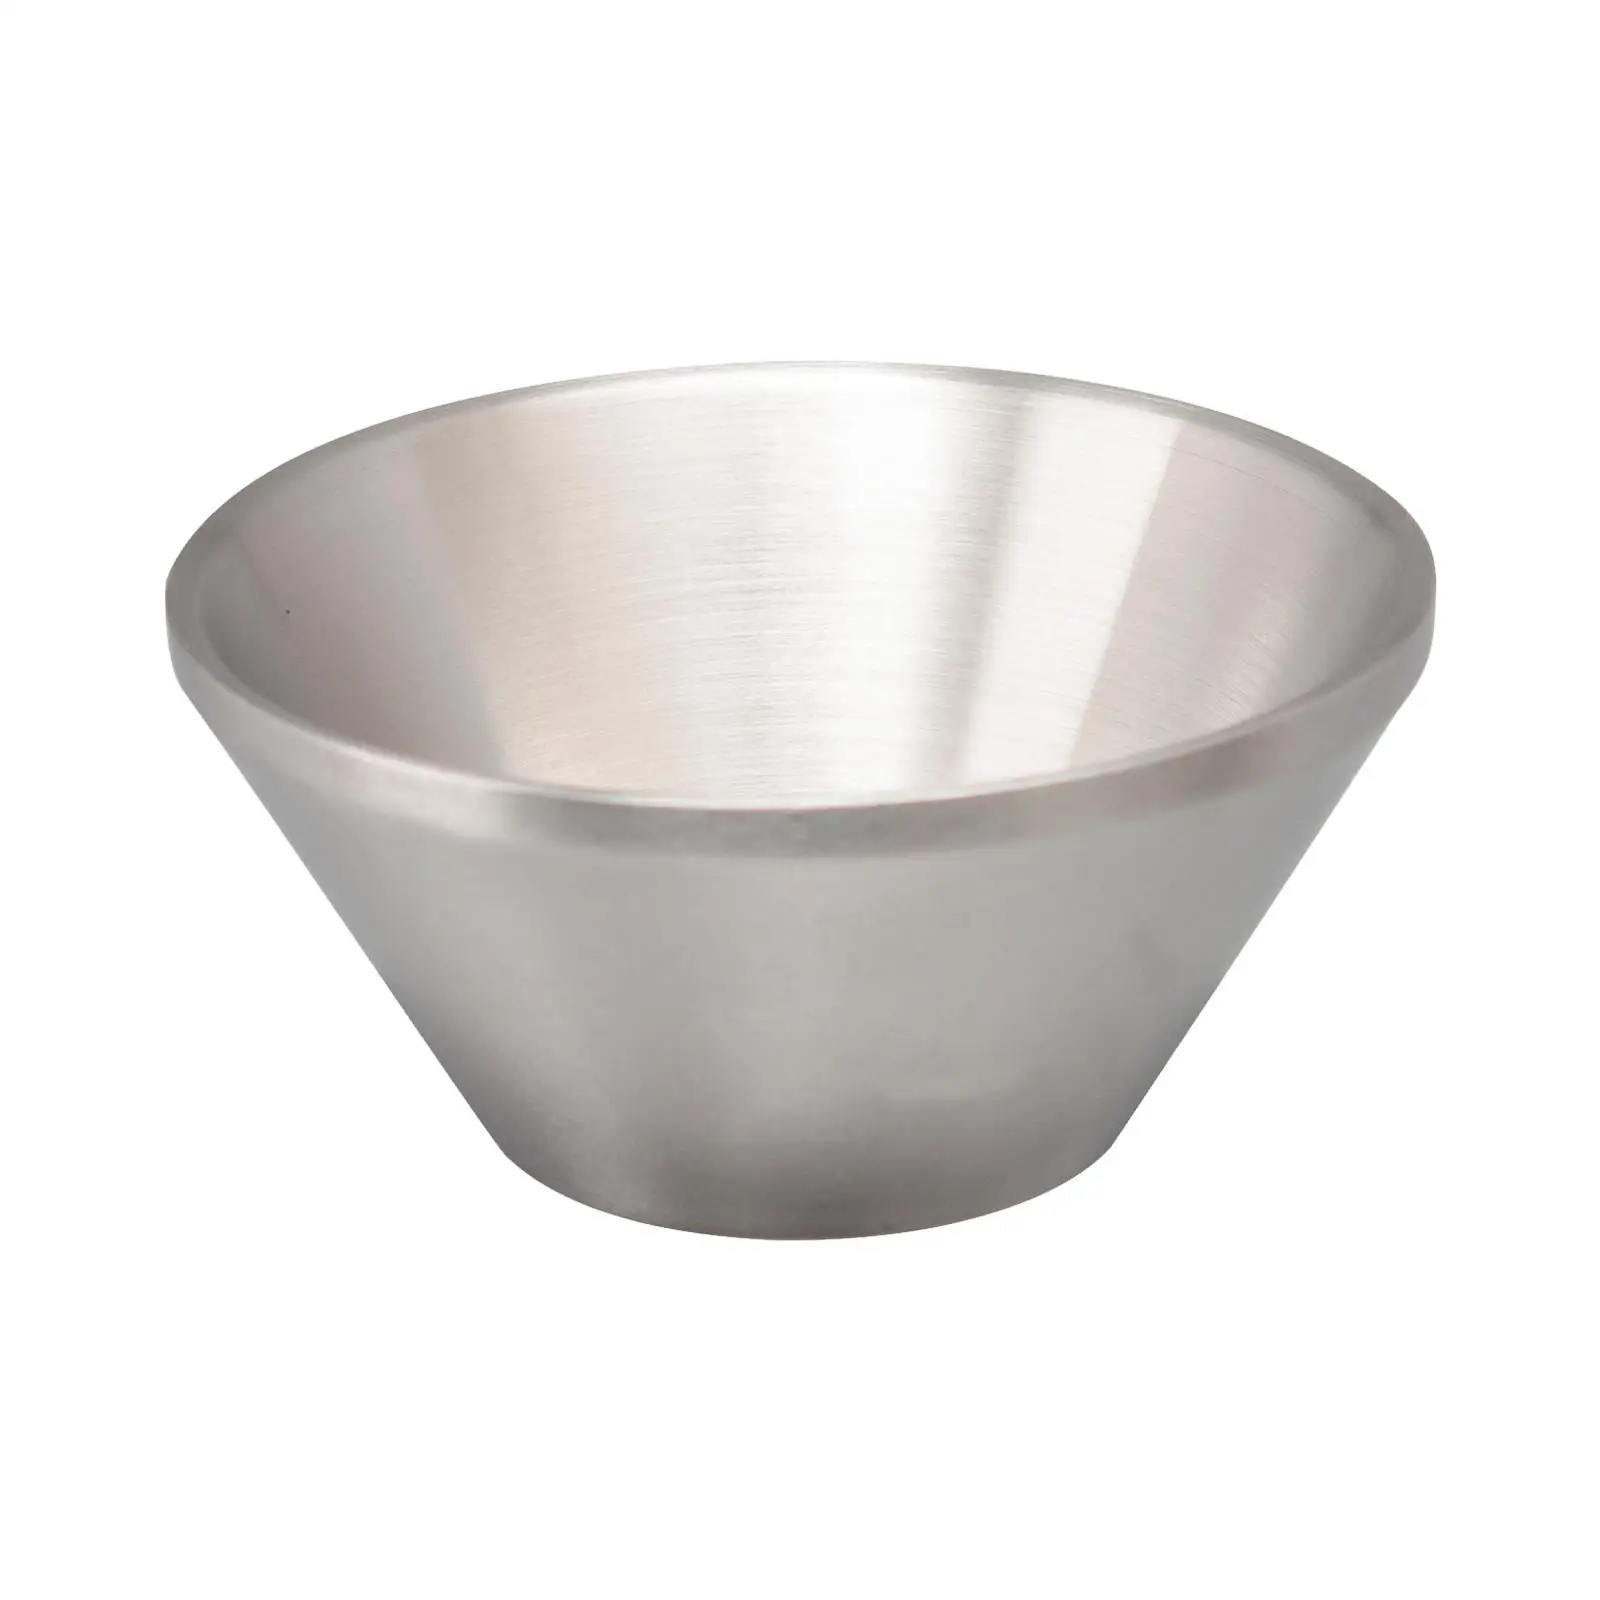 Stainless Steel Shaving Bowl Durable Shave Soap Cup for Maximum Lather